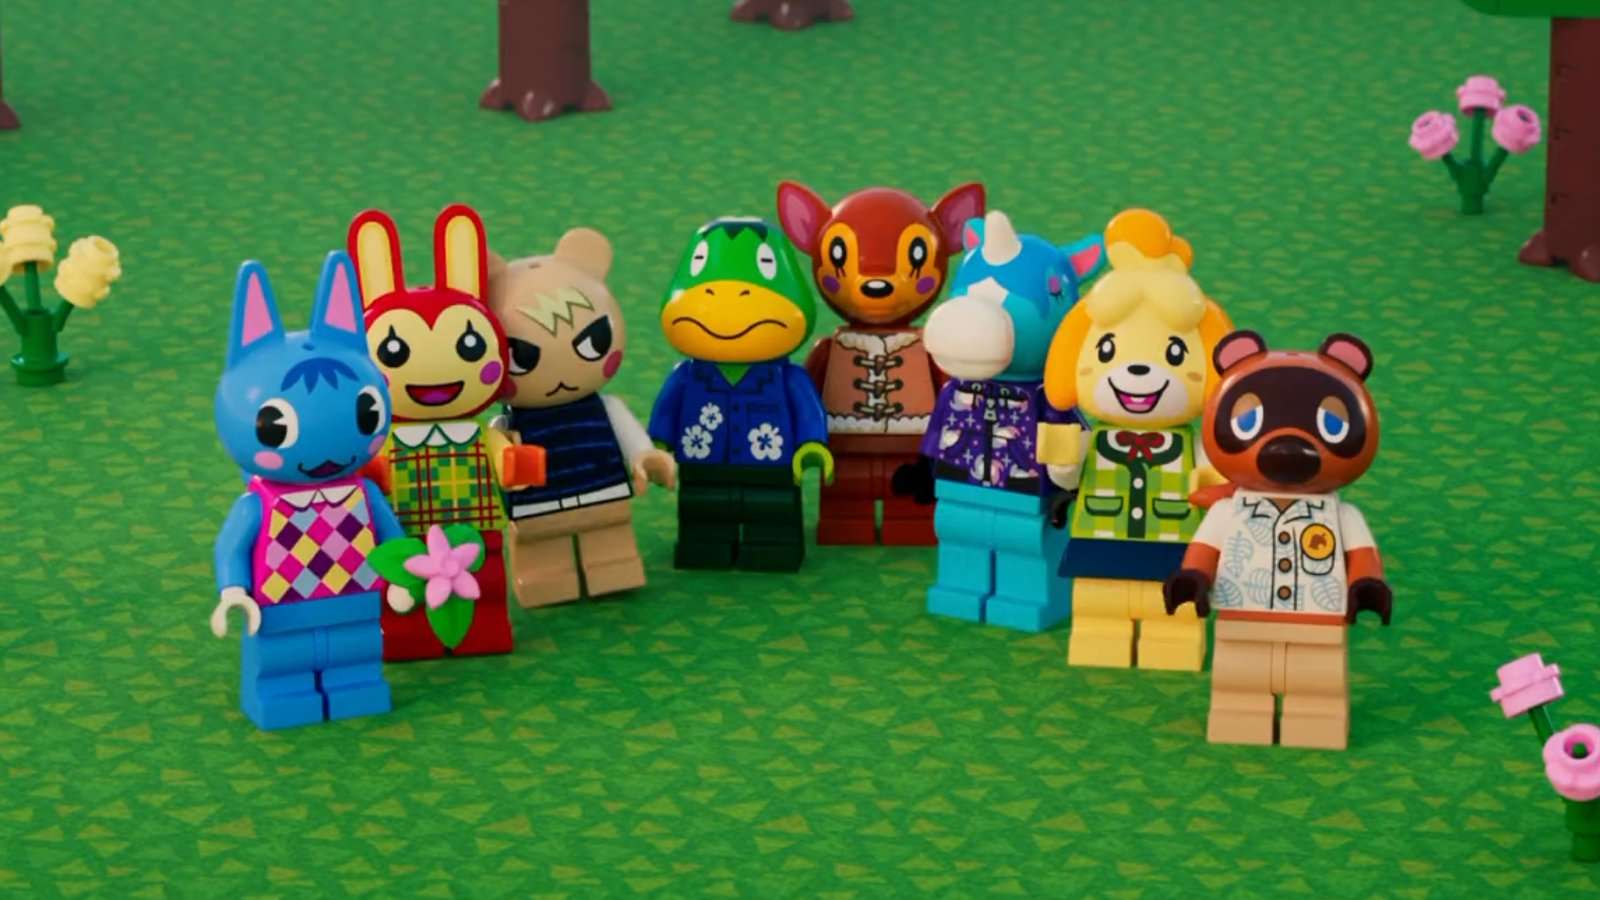 Lego Animal Crossing - Lego versions of villagers